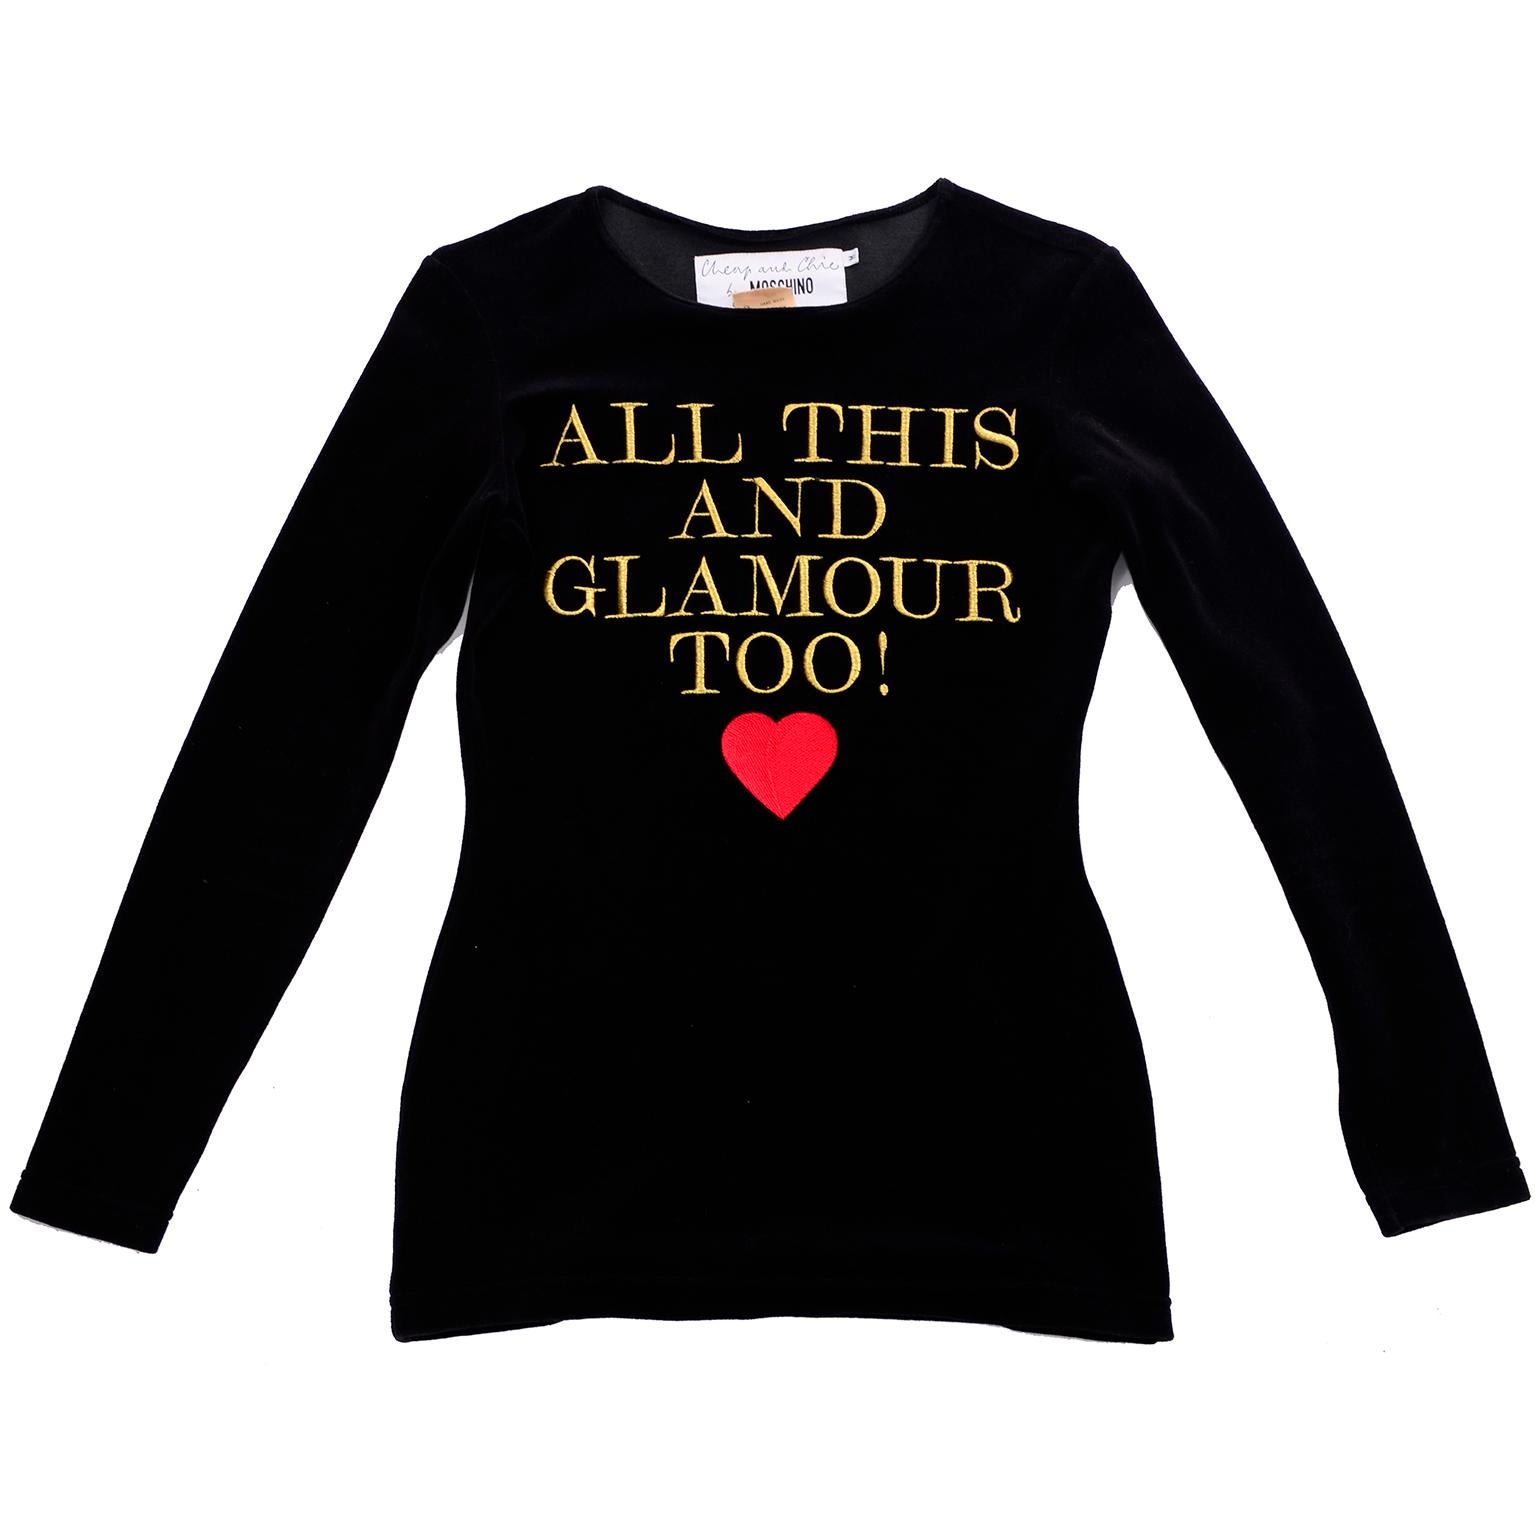 This is an iconic late 1980's vintage top from Moschino Cheap and Chic with Long Sleeves and the words 